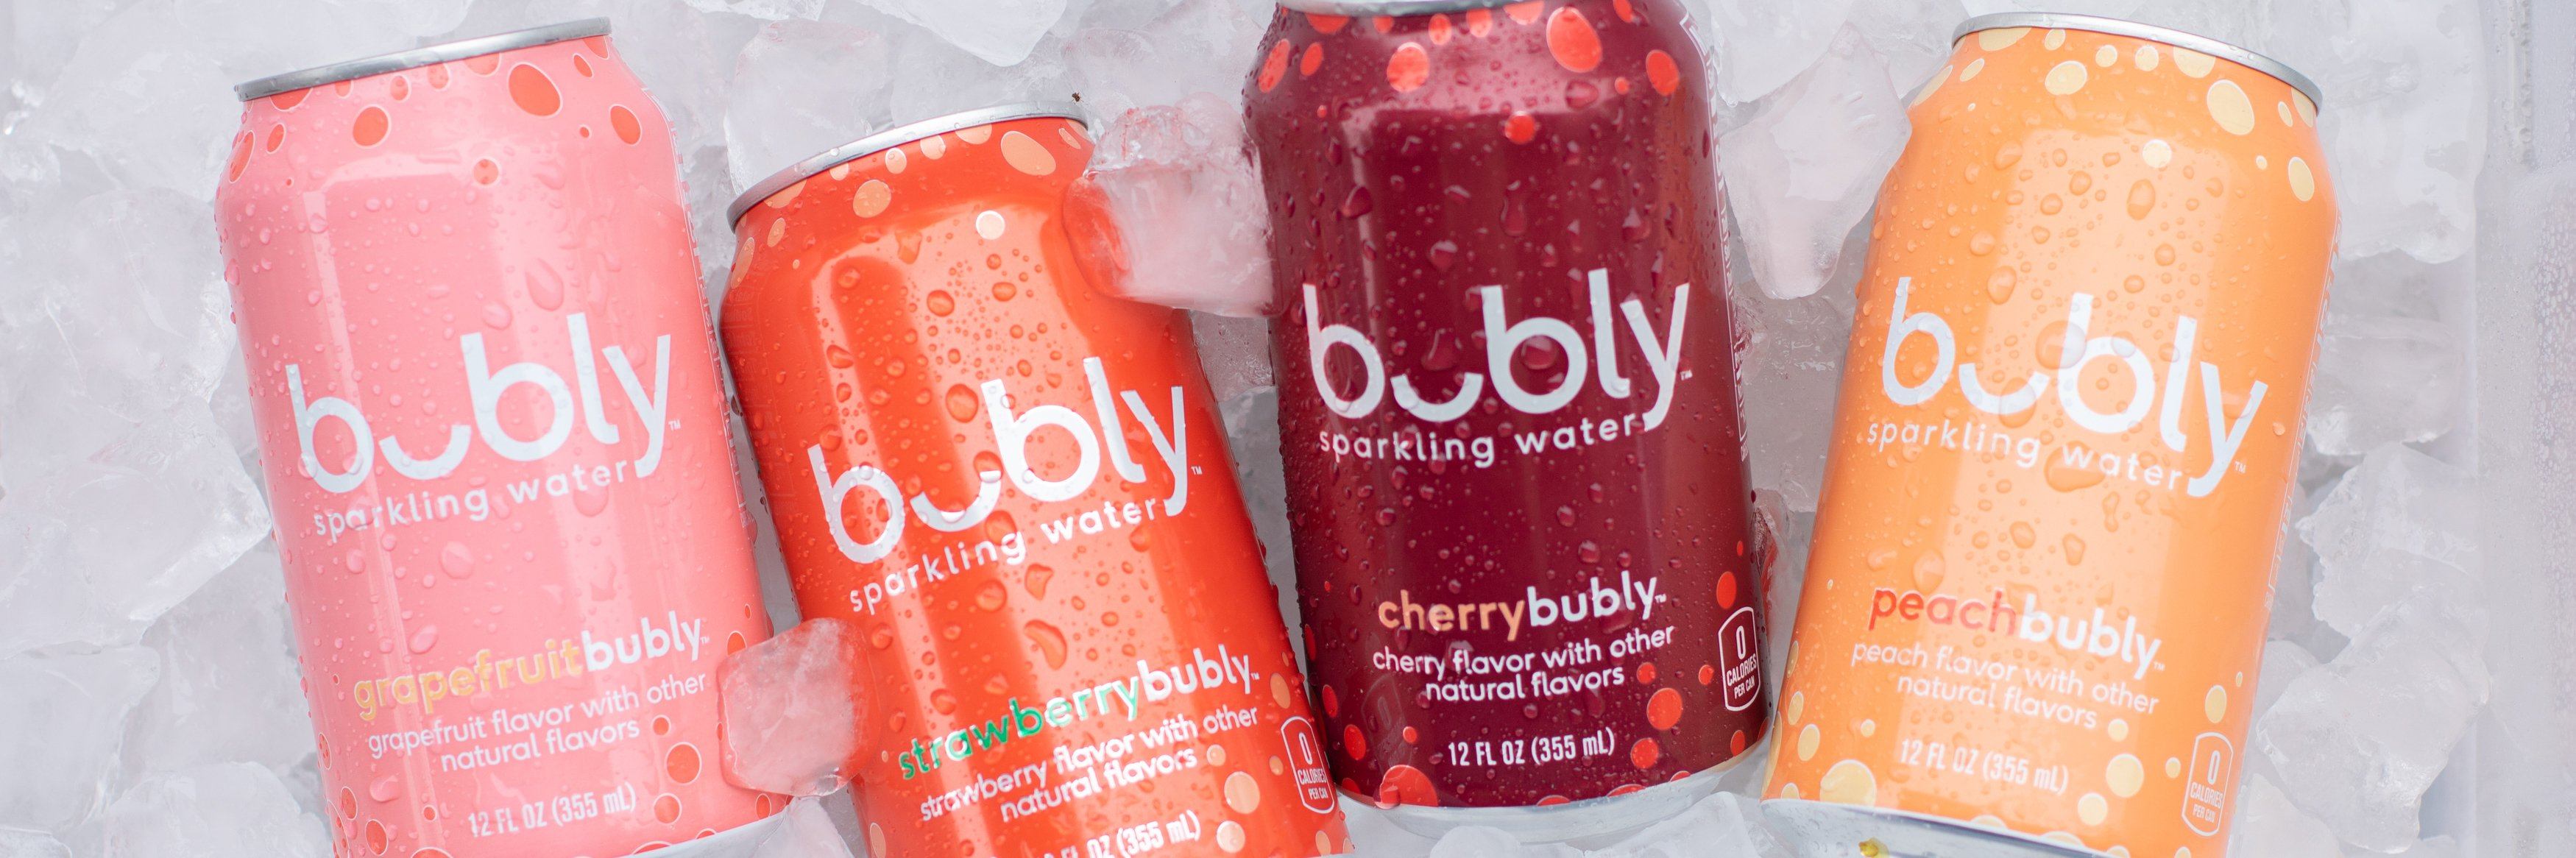 Four cans of bubly laying in a bed of ice